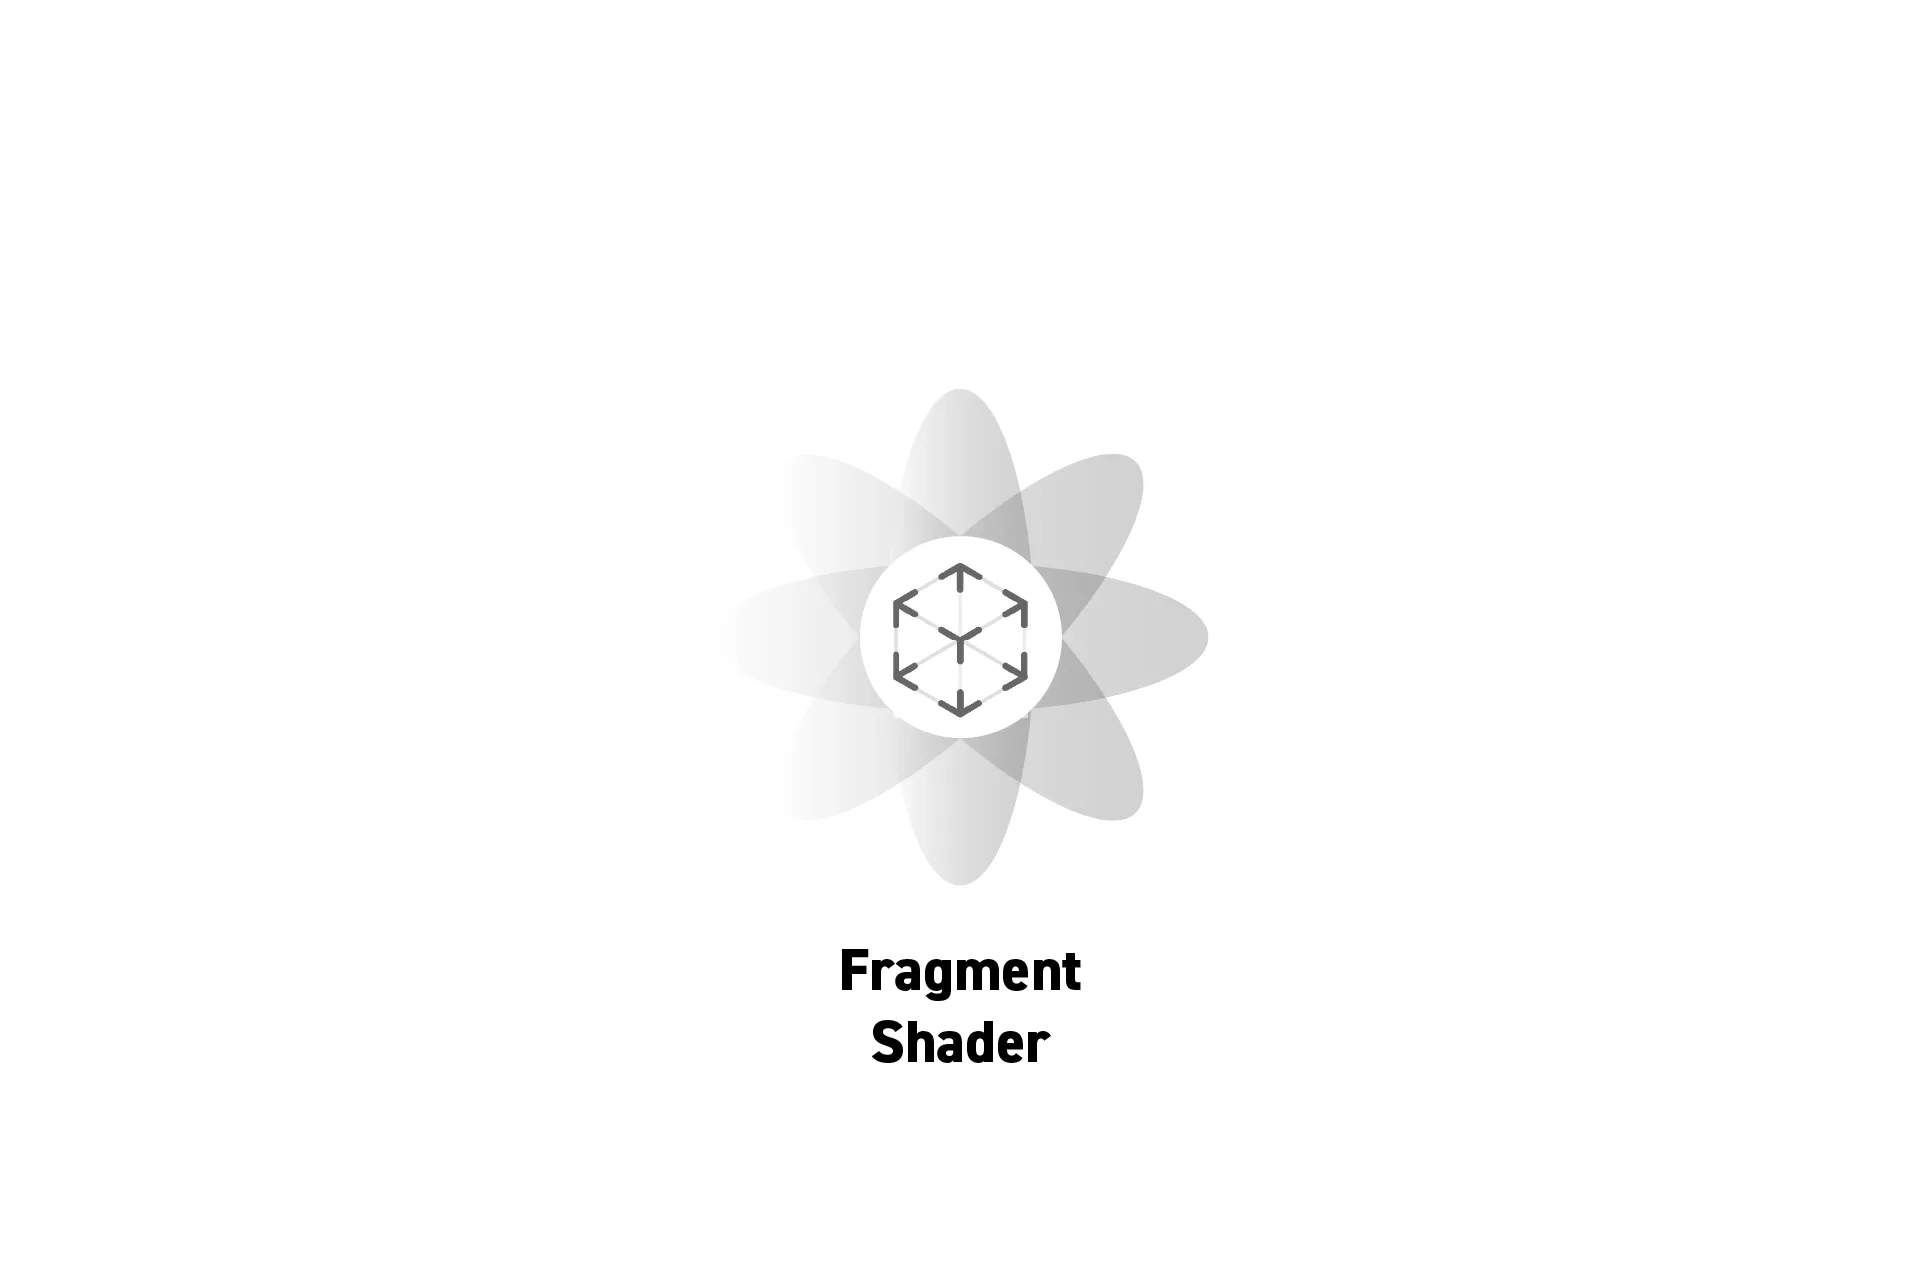 A flower that represents spatial computing with the text "Fragment Shader" beneath it.